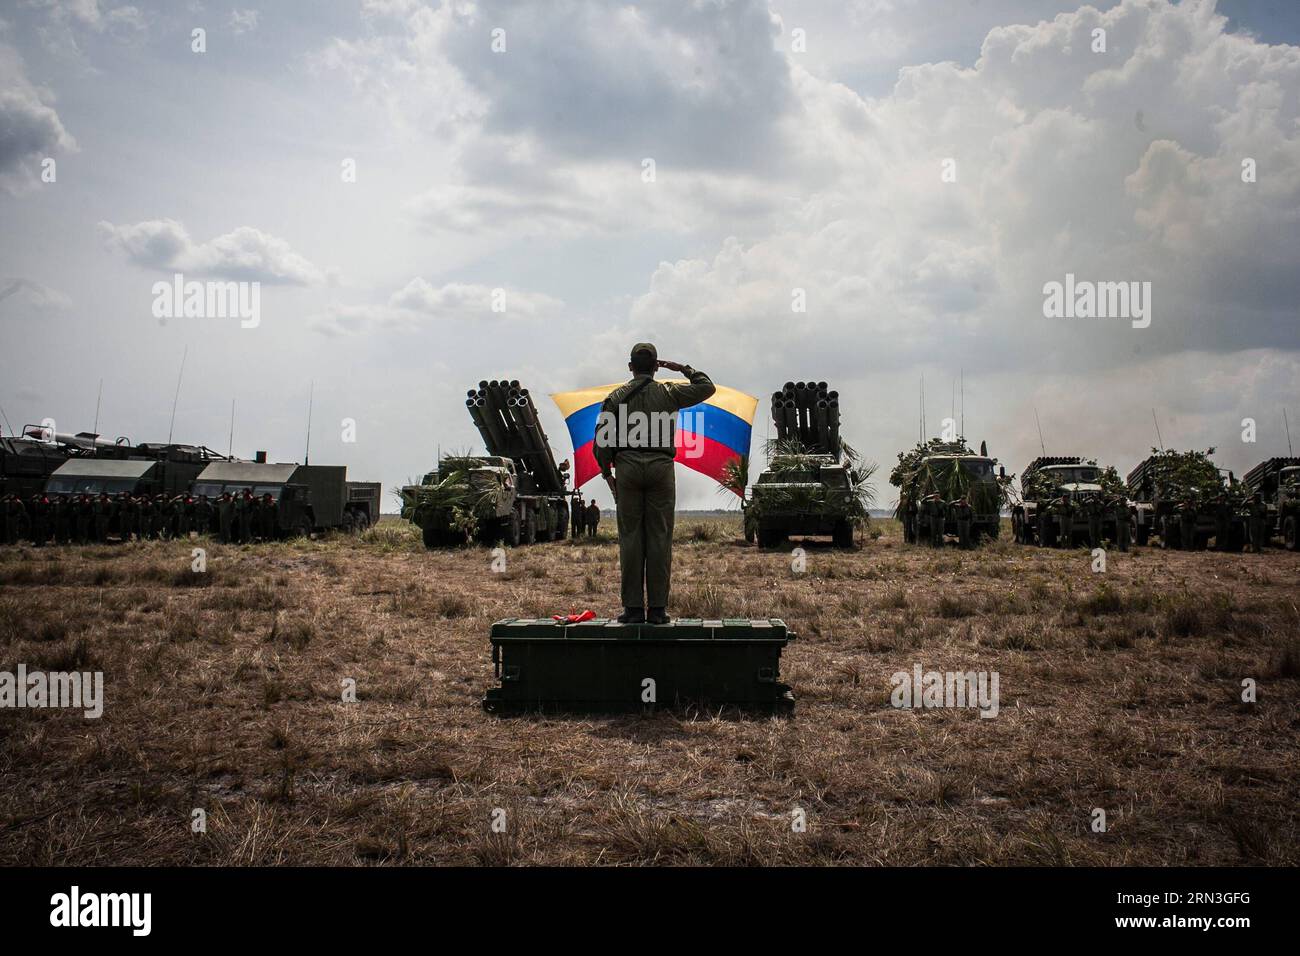 (150415) -- APURE, April 15, 2015 -- A member of the Bolivarian Armed National Force (FANB) takes part in the military exercise 2015 Sovereign Shield in San Carlos del Meta, Apure state, Venezuela, on April 15, 2015. The FANB held a military exercise of antiaircraft artillery drill 2015 Sovereign Shield with the participation of 480 military members, according to local press. Boris Vergara) (azp) VENEZUELA-APURE-MILITARY-EXERCISE e BorisxVergara PUBLICATIONxNOTxINxCHN   April 15 2015 a member of The Bolivarian Armed National Force  Takes Part in The Military EXERCISE 2015 Sovereign Shield in S Stock Photo